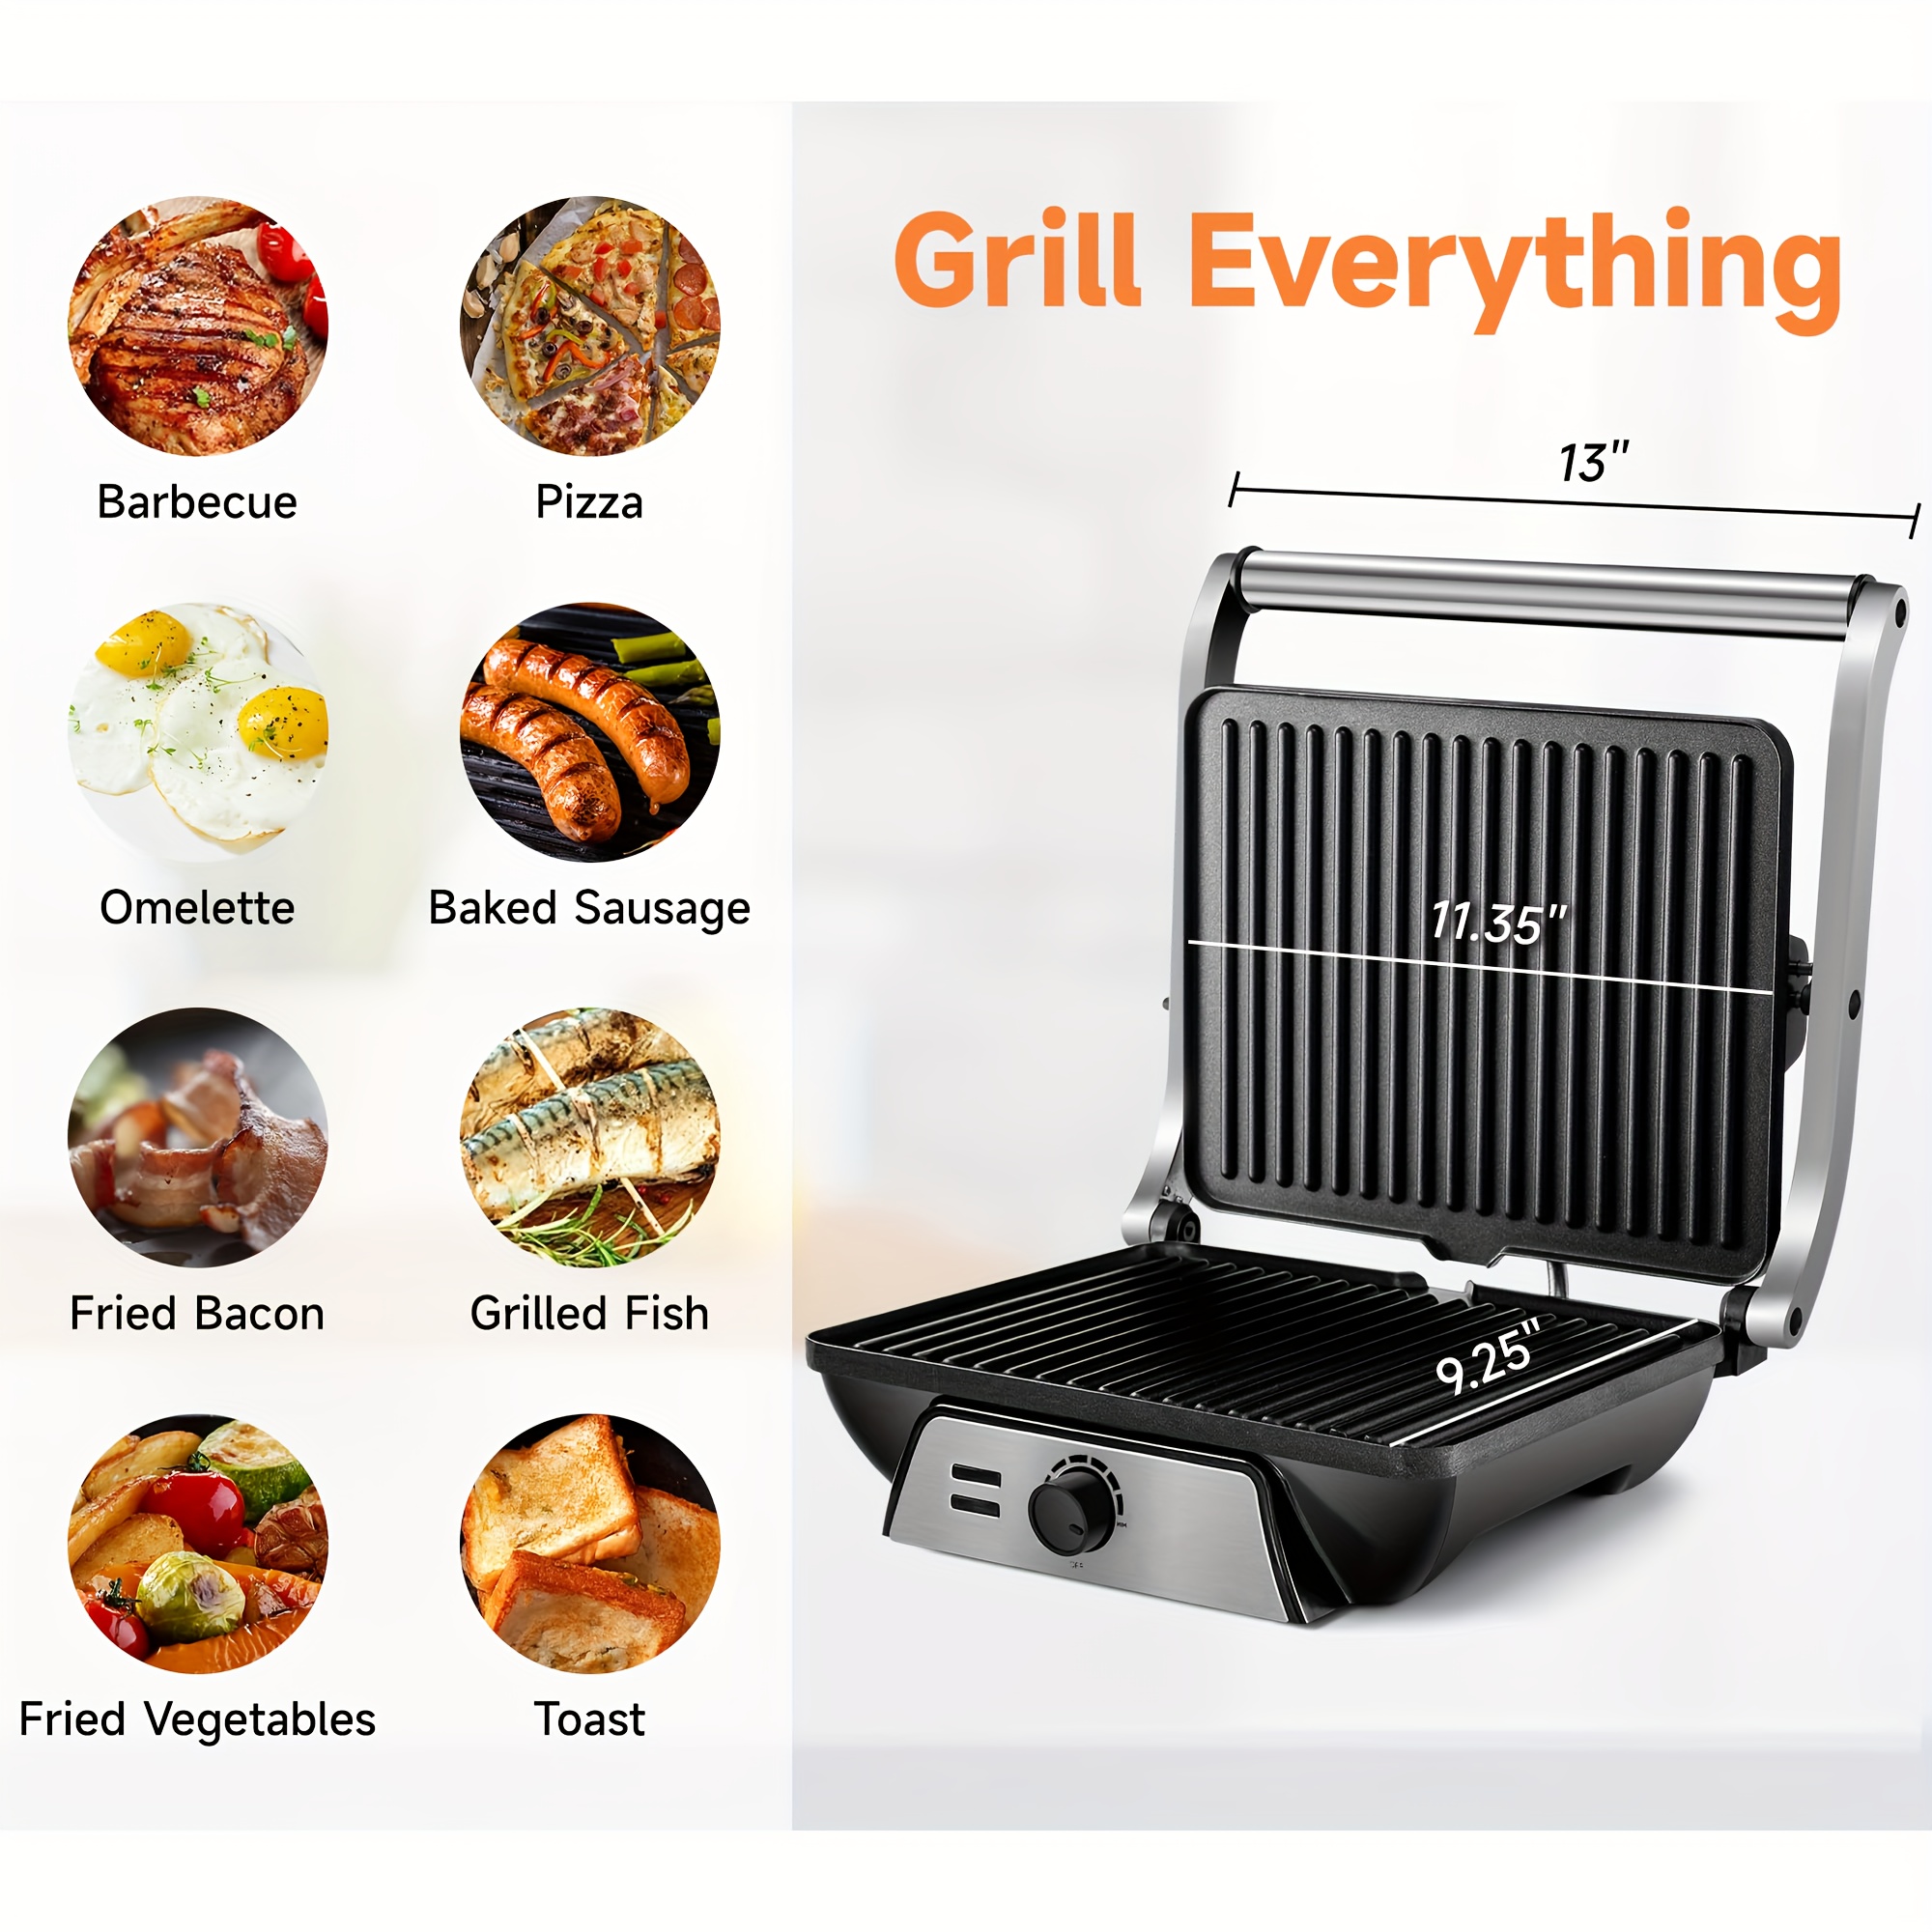 susteas 3 in 1 electric indoor grill panini press with non stick cooking plates opens 180 degree gourmet sandwich maker floating hinge fits all foods panini press grill with grease tray